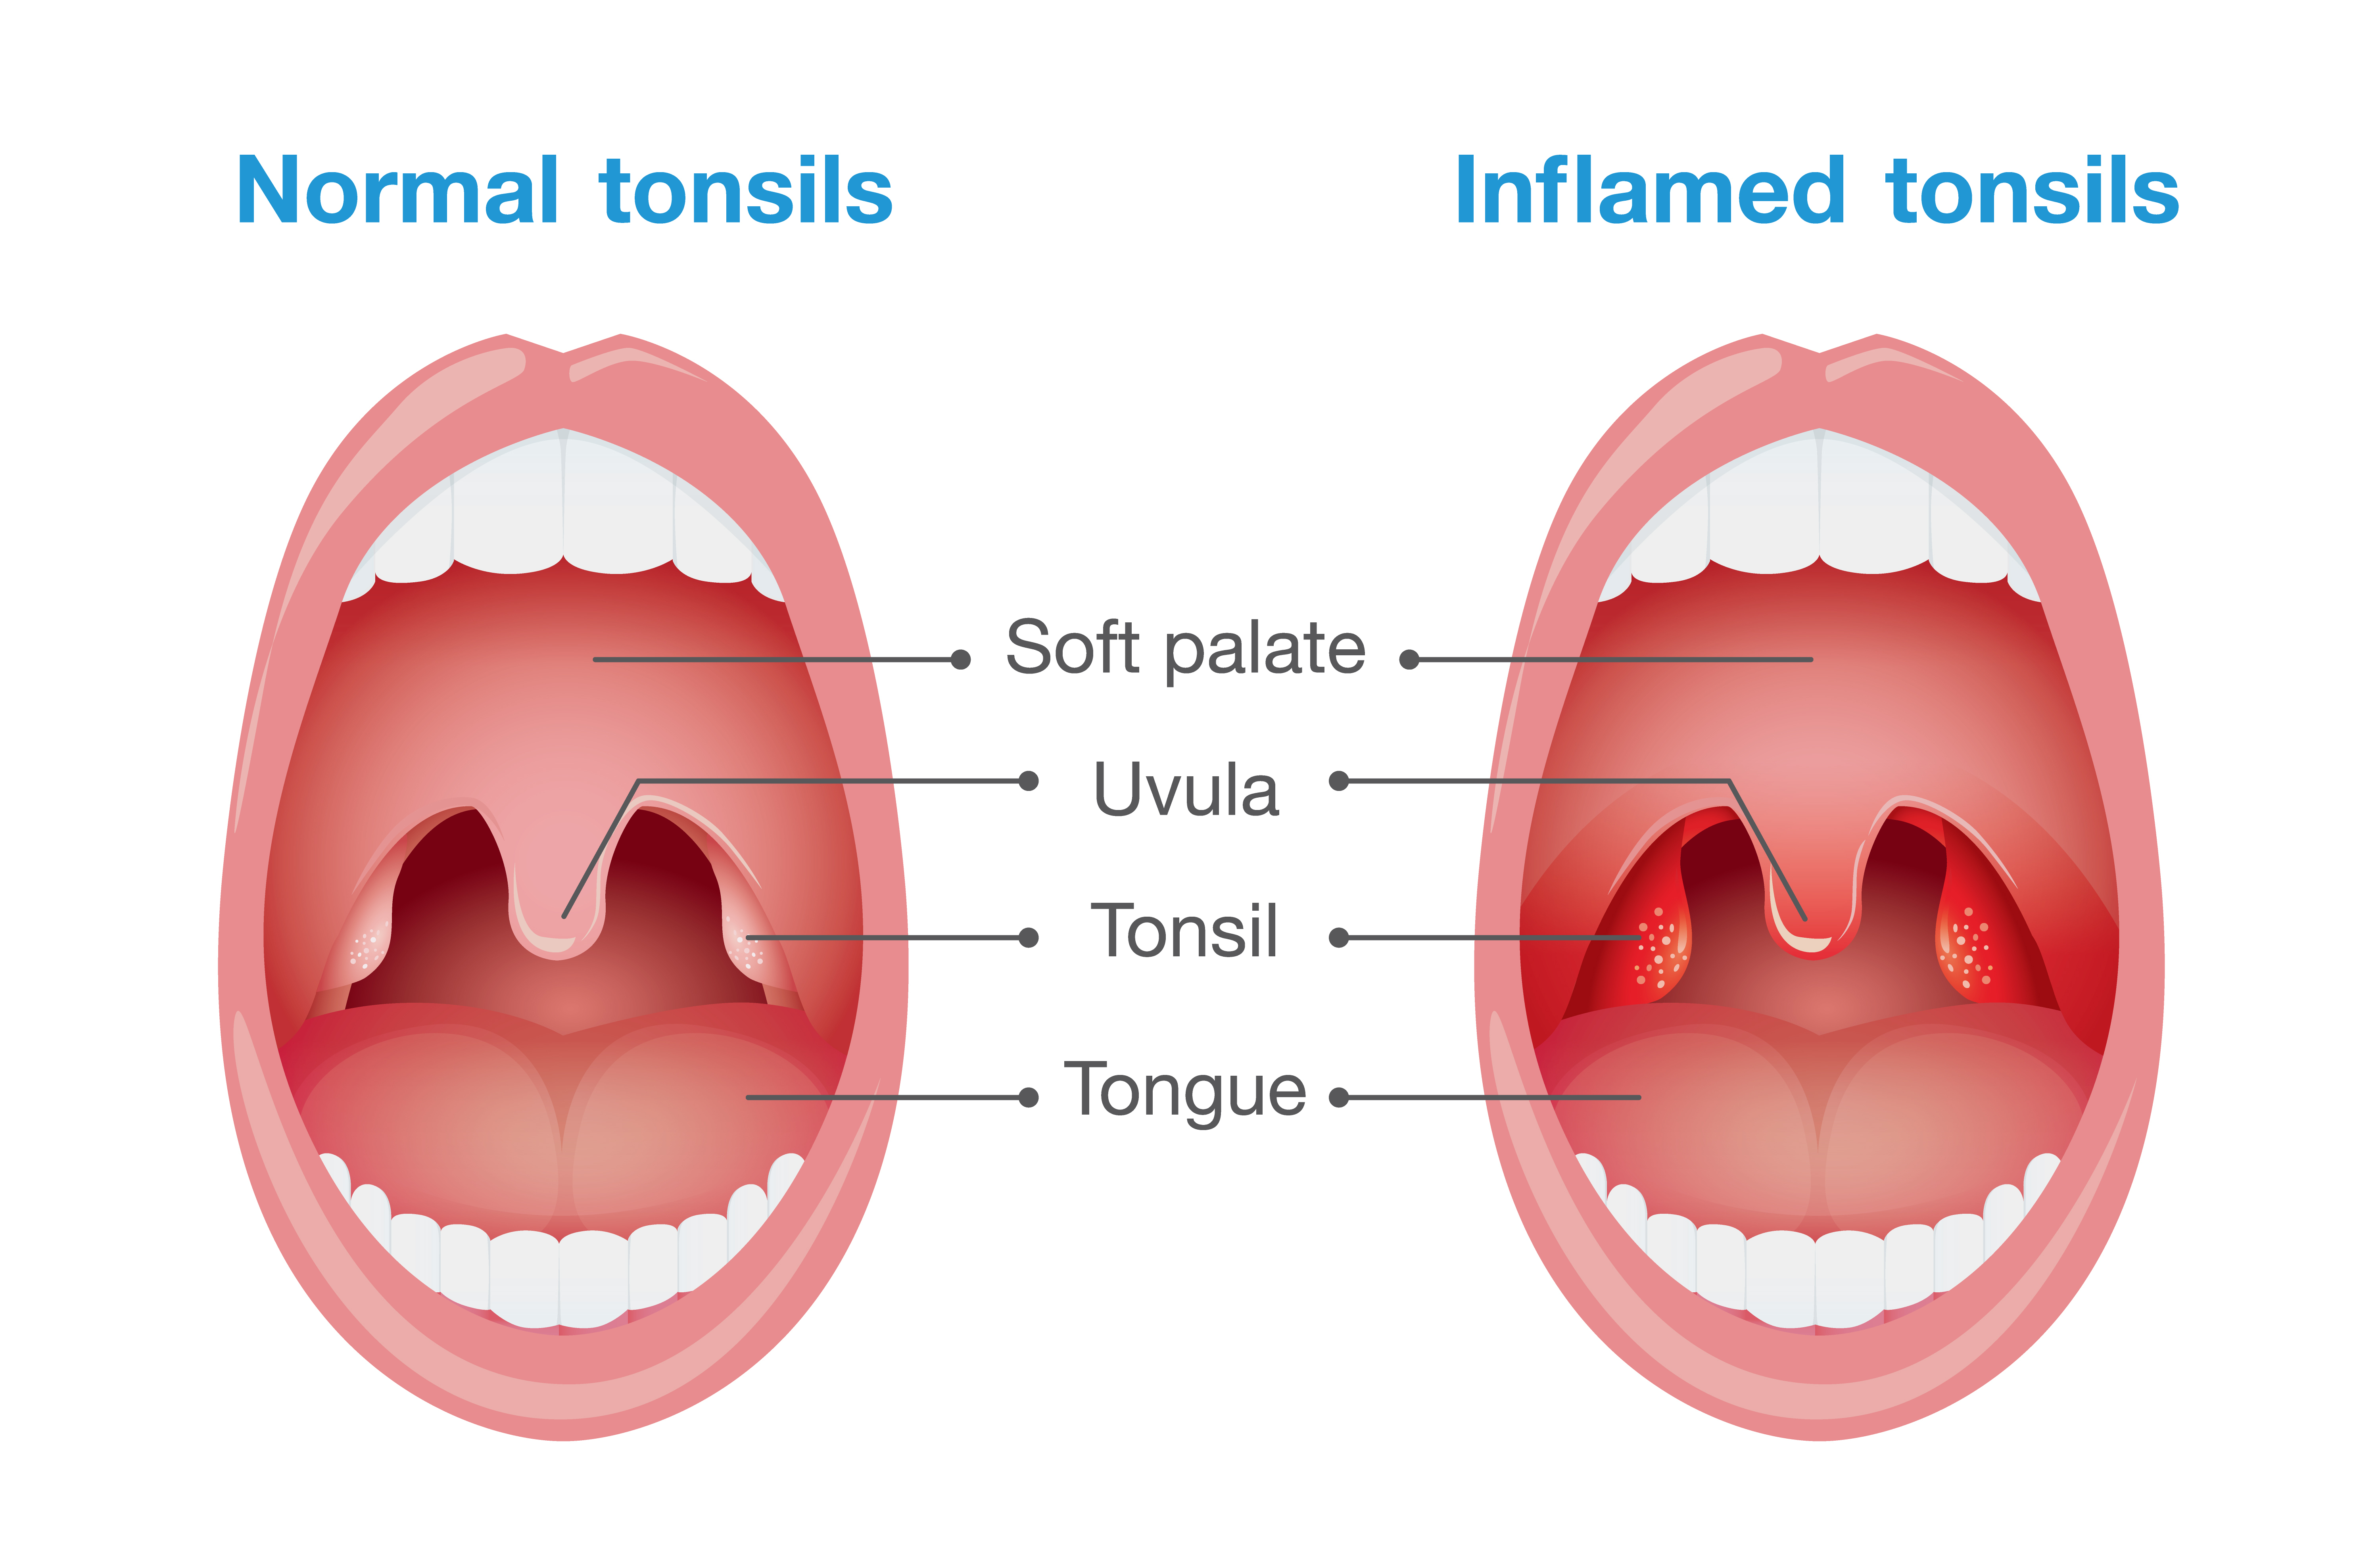 Diagram comparing normal tonsils (left) and inflamed tonsils (right)